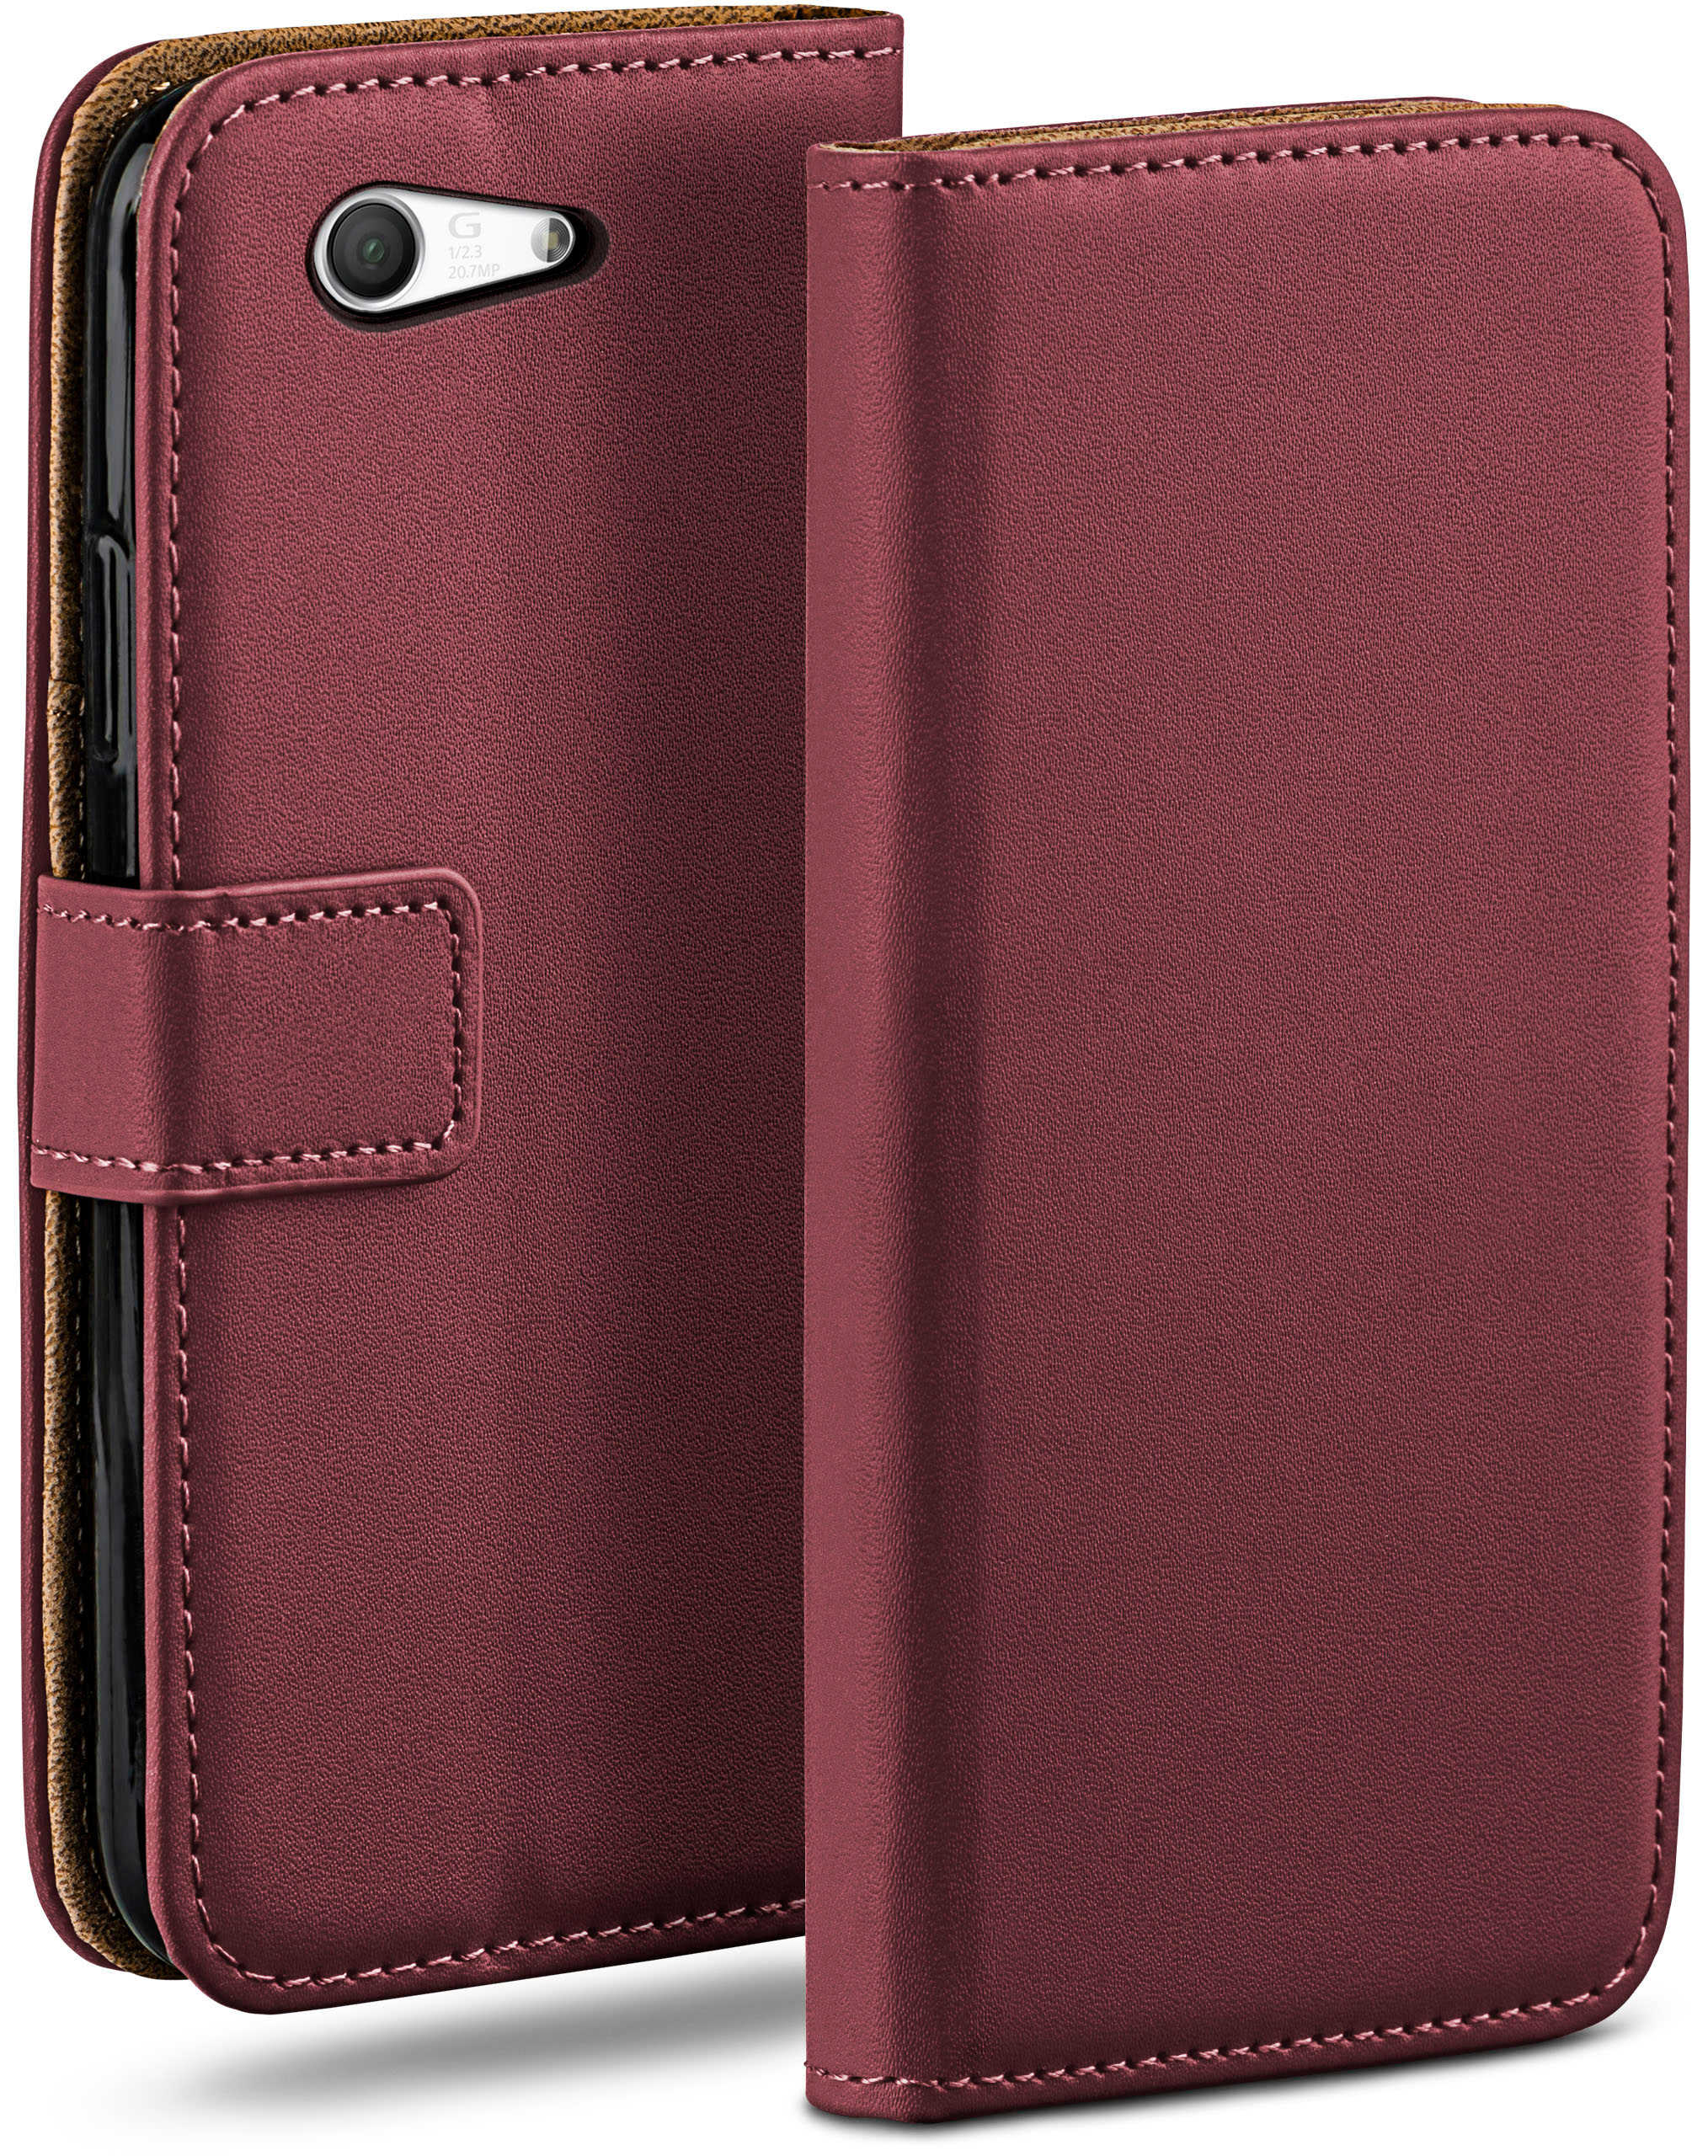 MOEX Book Sony, Case, Bookcover, Maroon-Red Z3 Xperia Compact